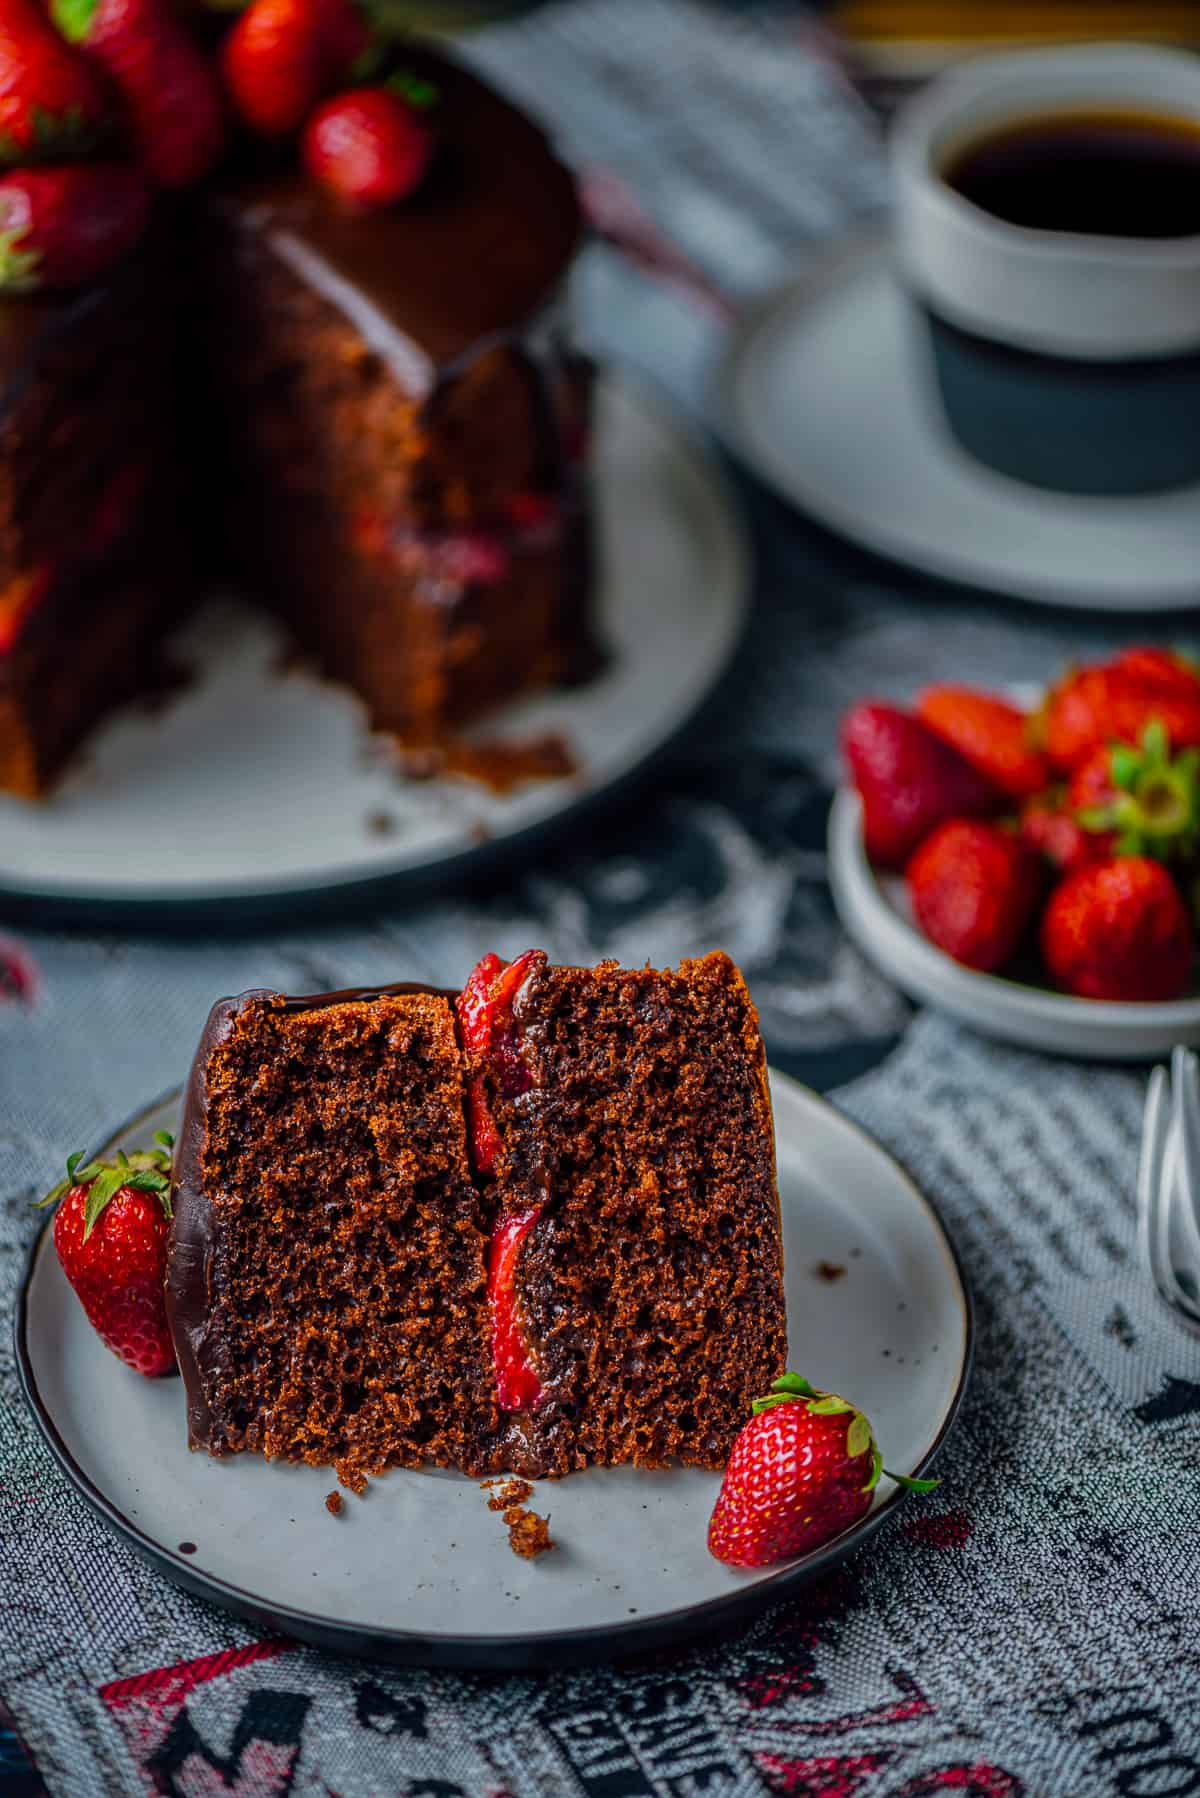 A slice of chocolate cake with strawberries served on a plate and the whole cake, more strawberries and a cup of coffee behind it.